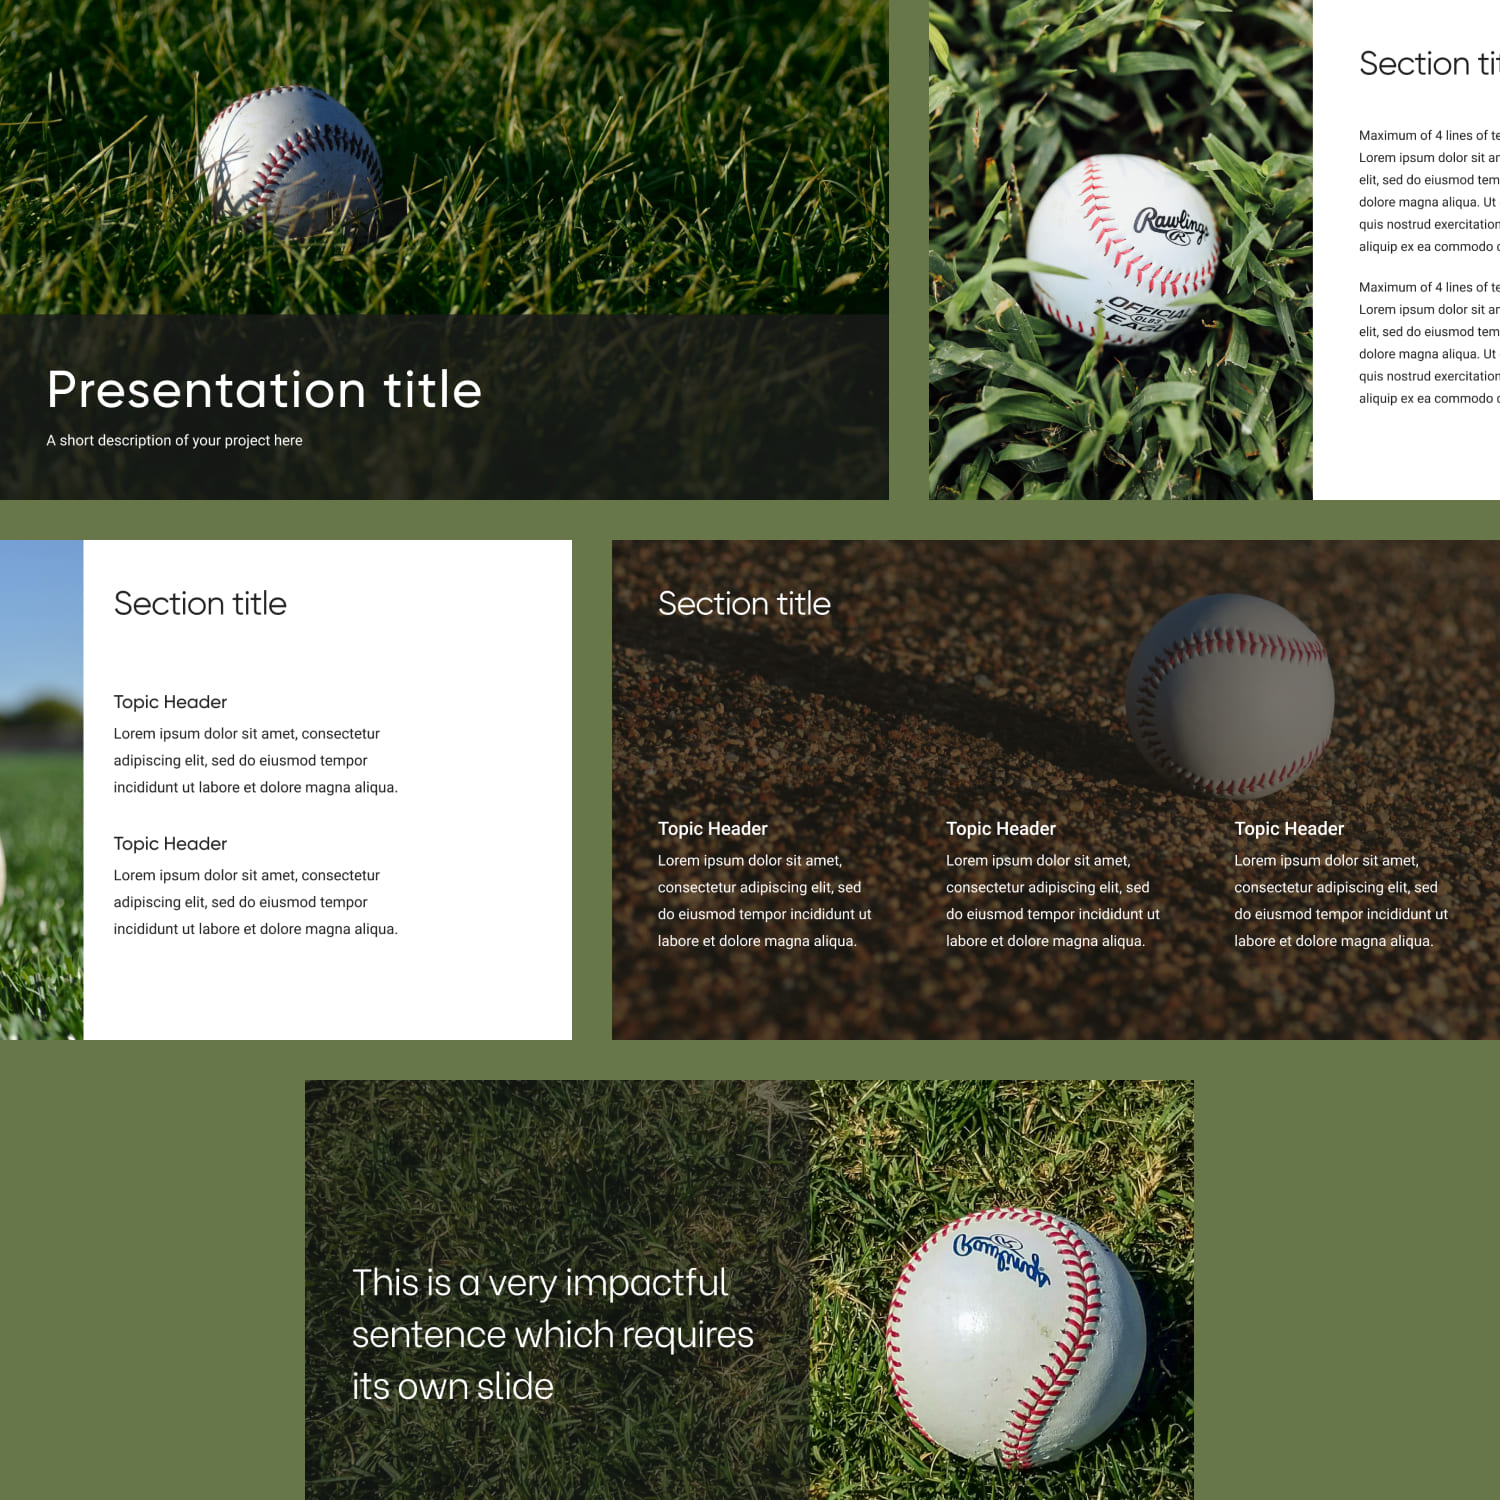 Images with Baseball Powerpoint Template.